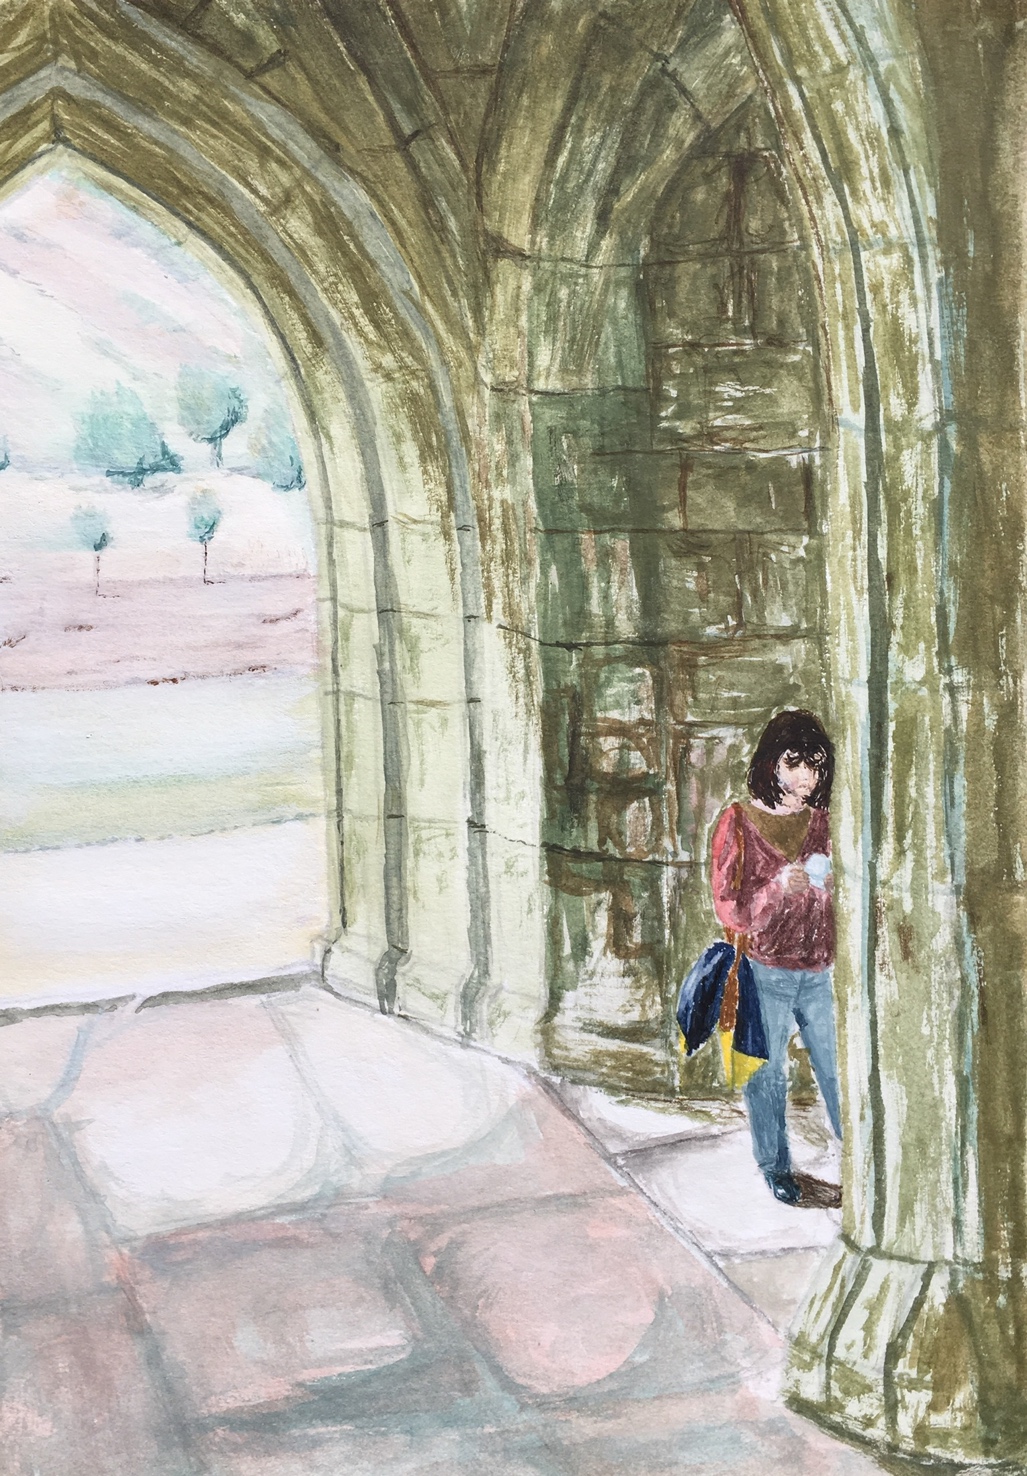 #002 - Girl in Valle Crucis Abbey